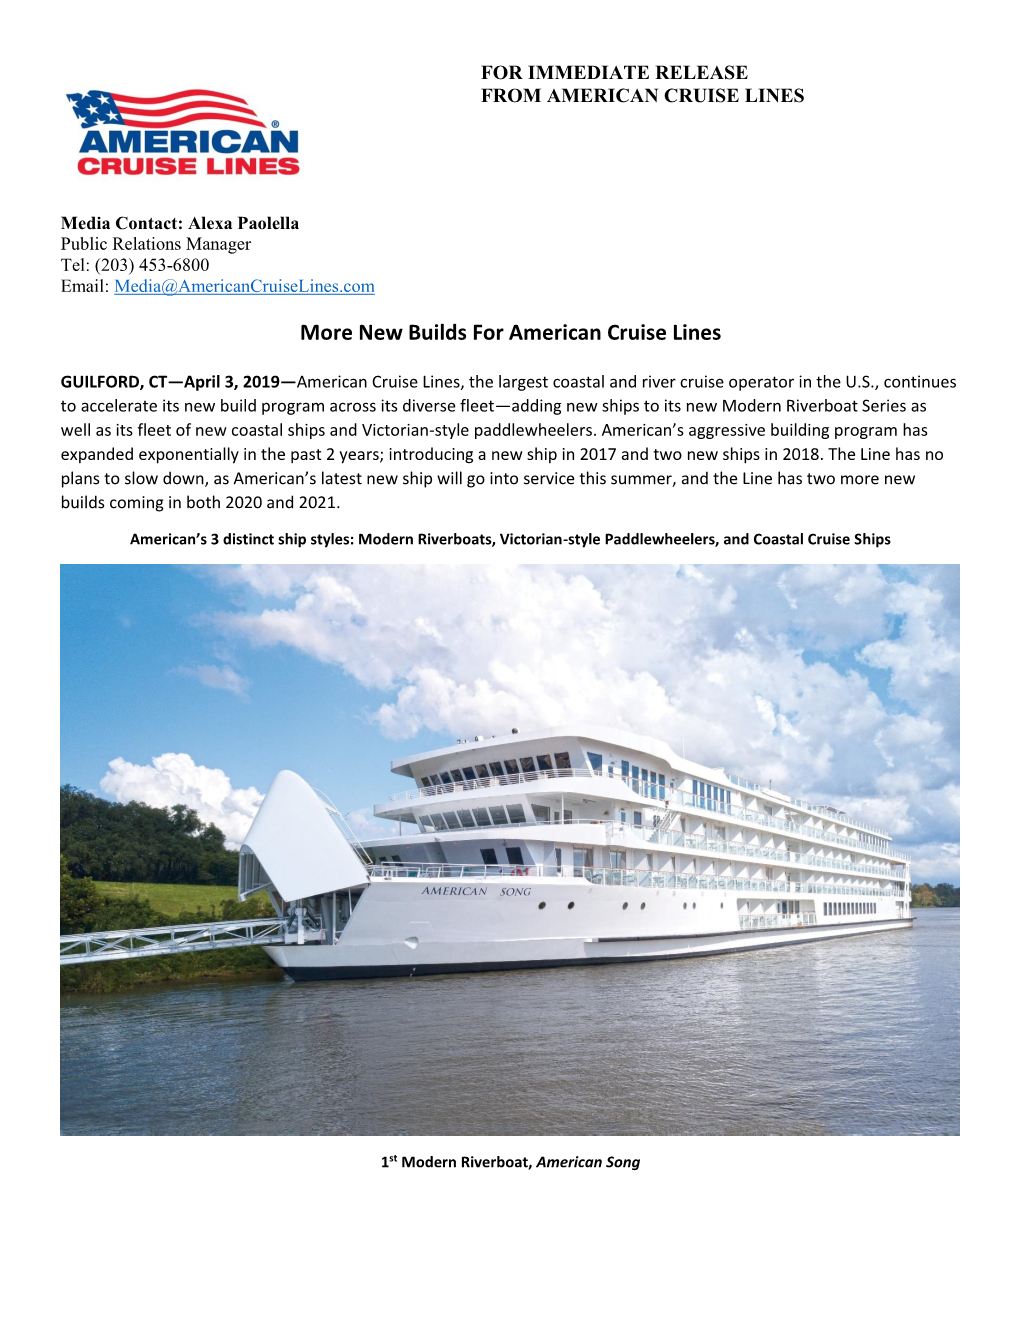 More New Builds for American Cruise Lines